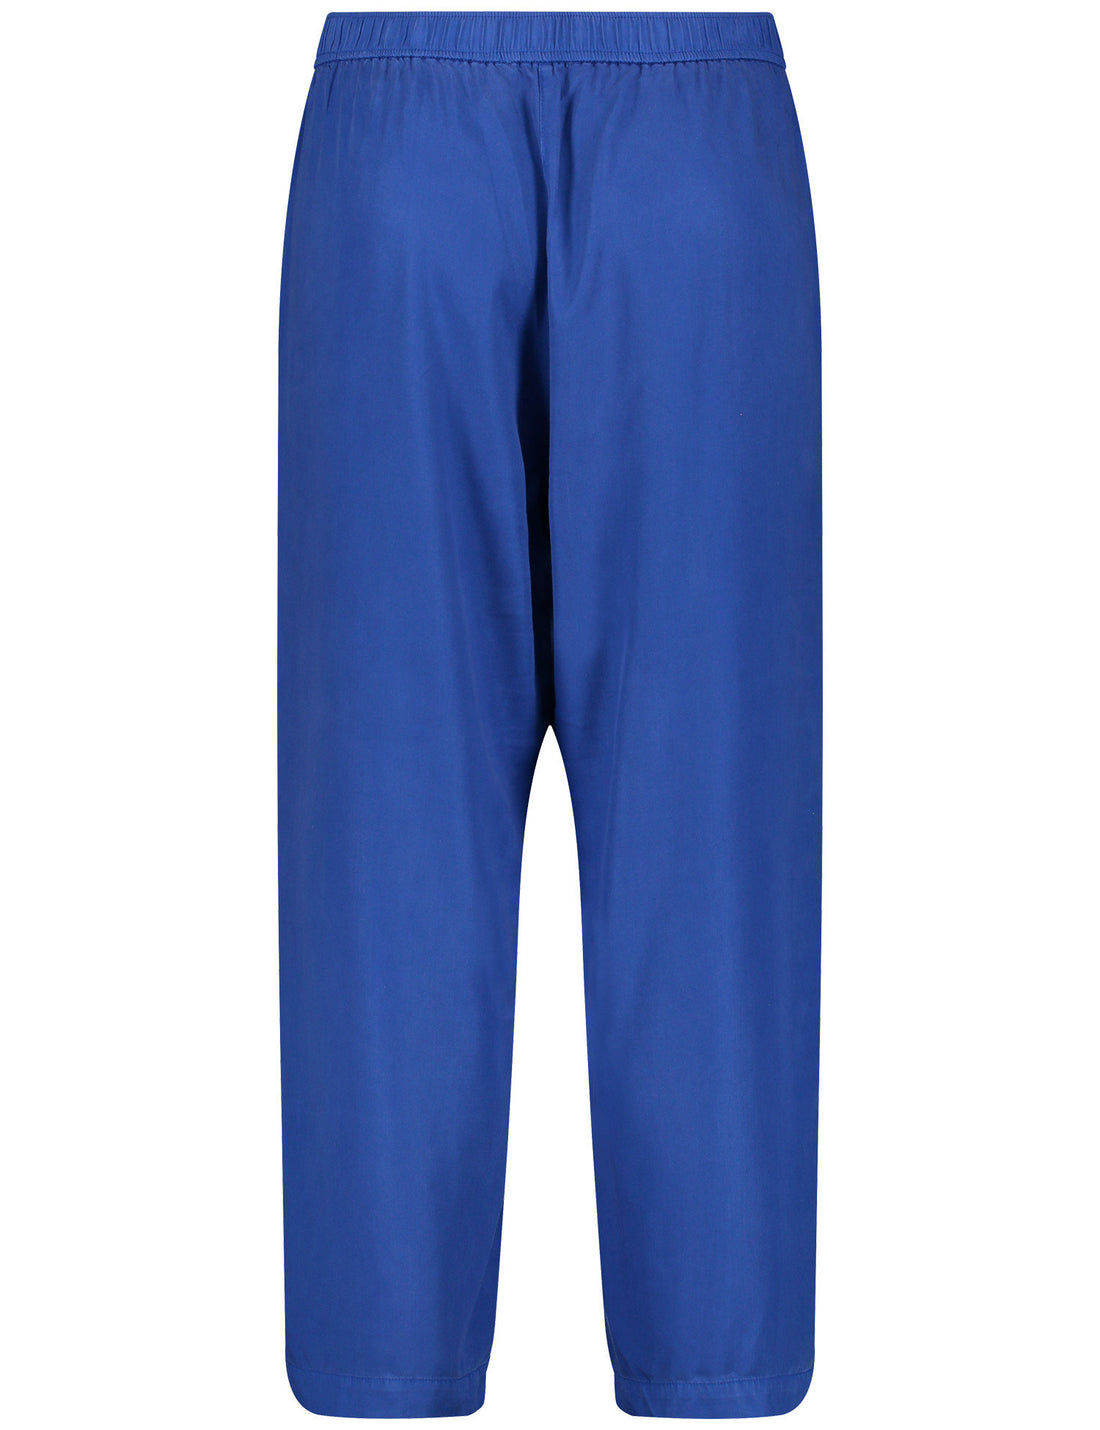 Wide Summer Trousers Made Of Lyocell_420036-21068_8860_02